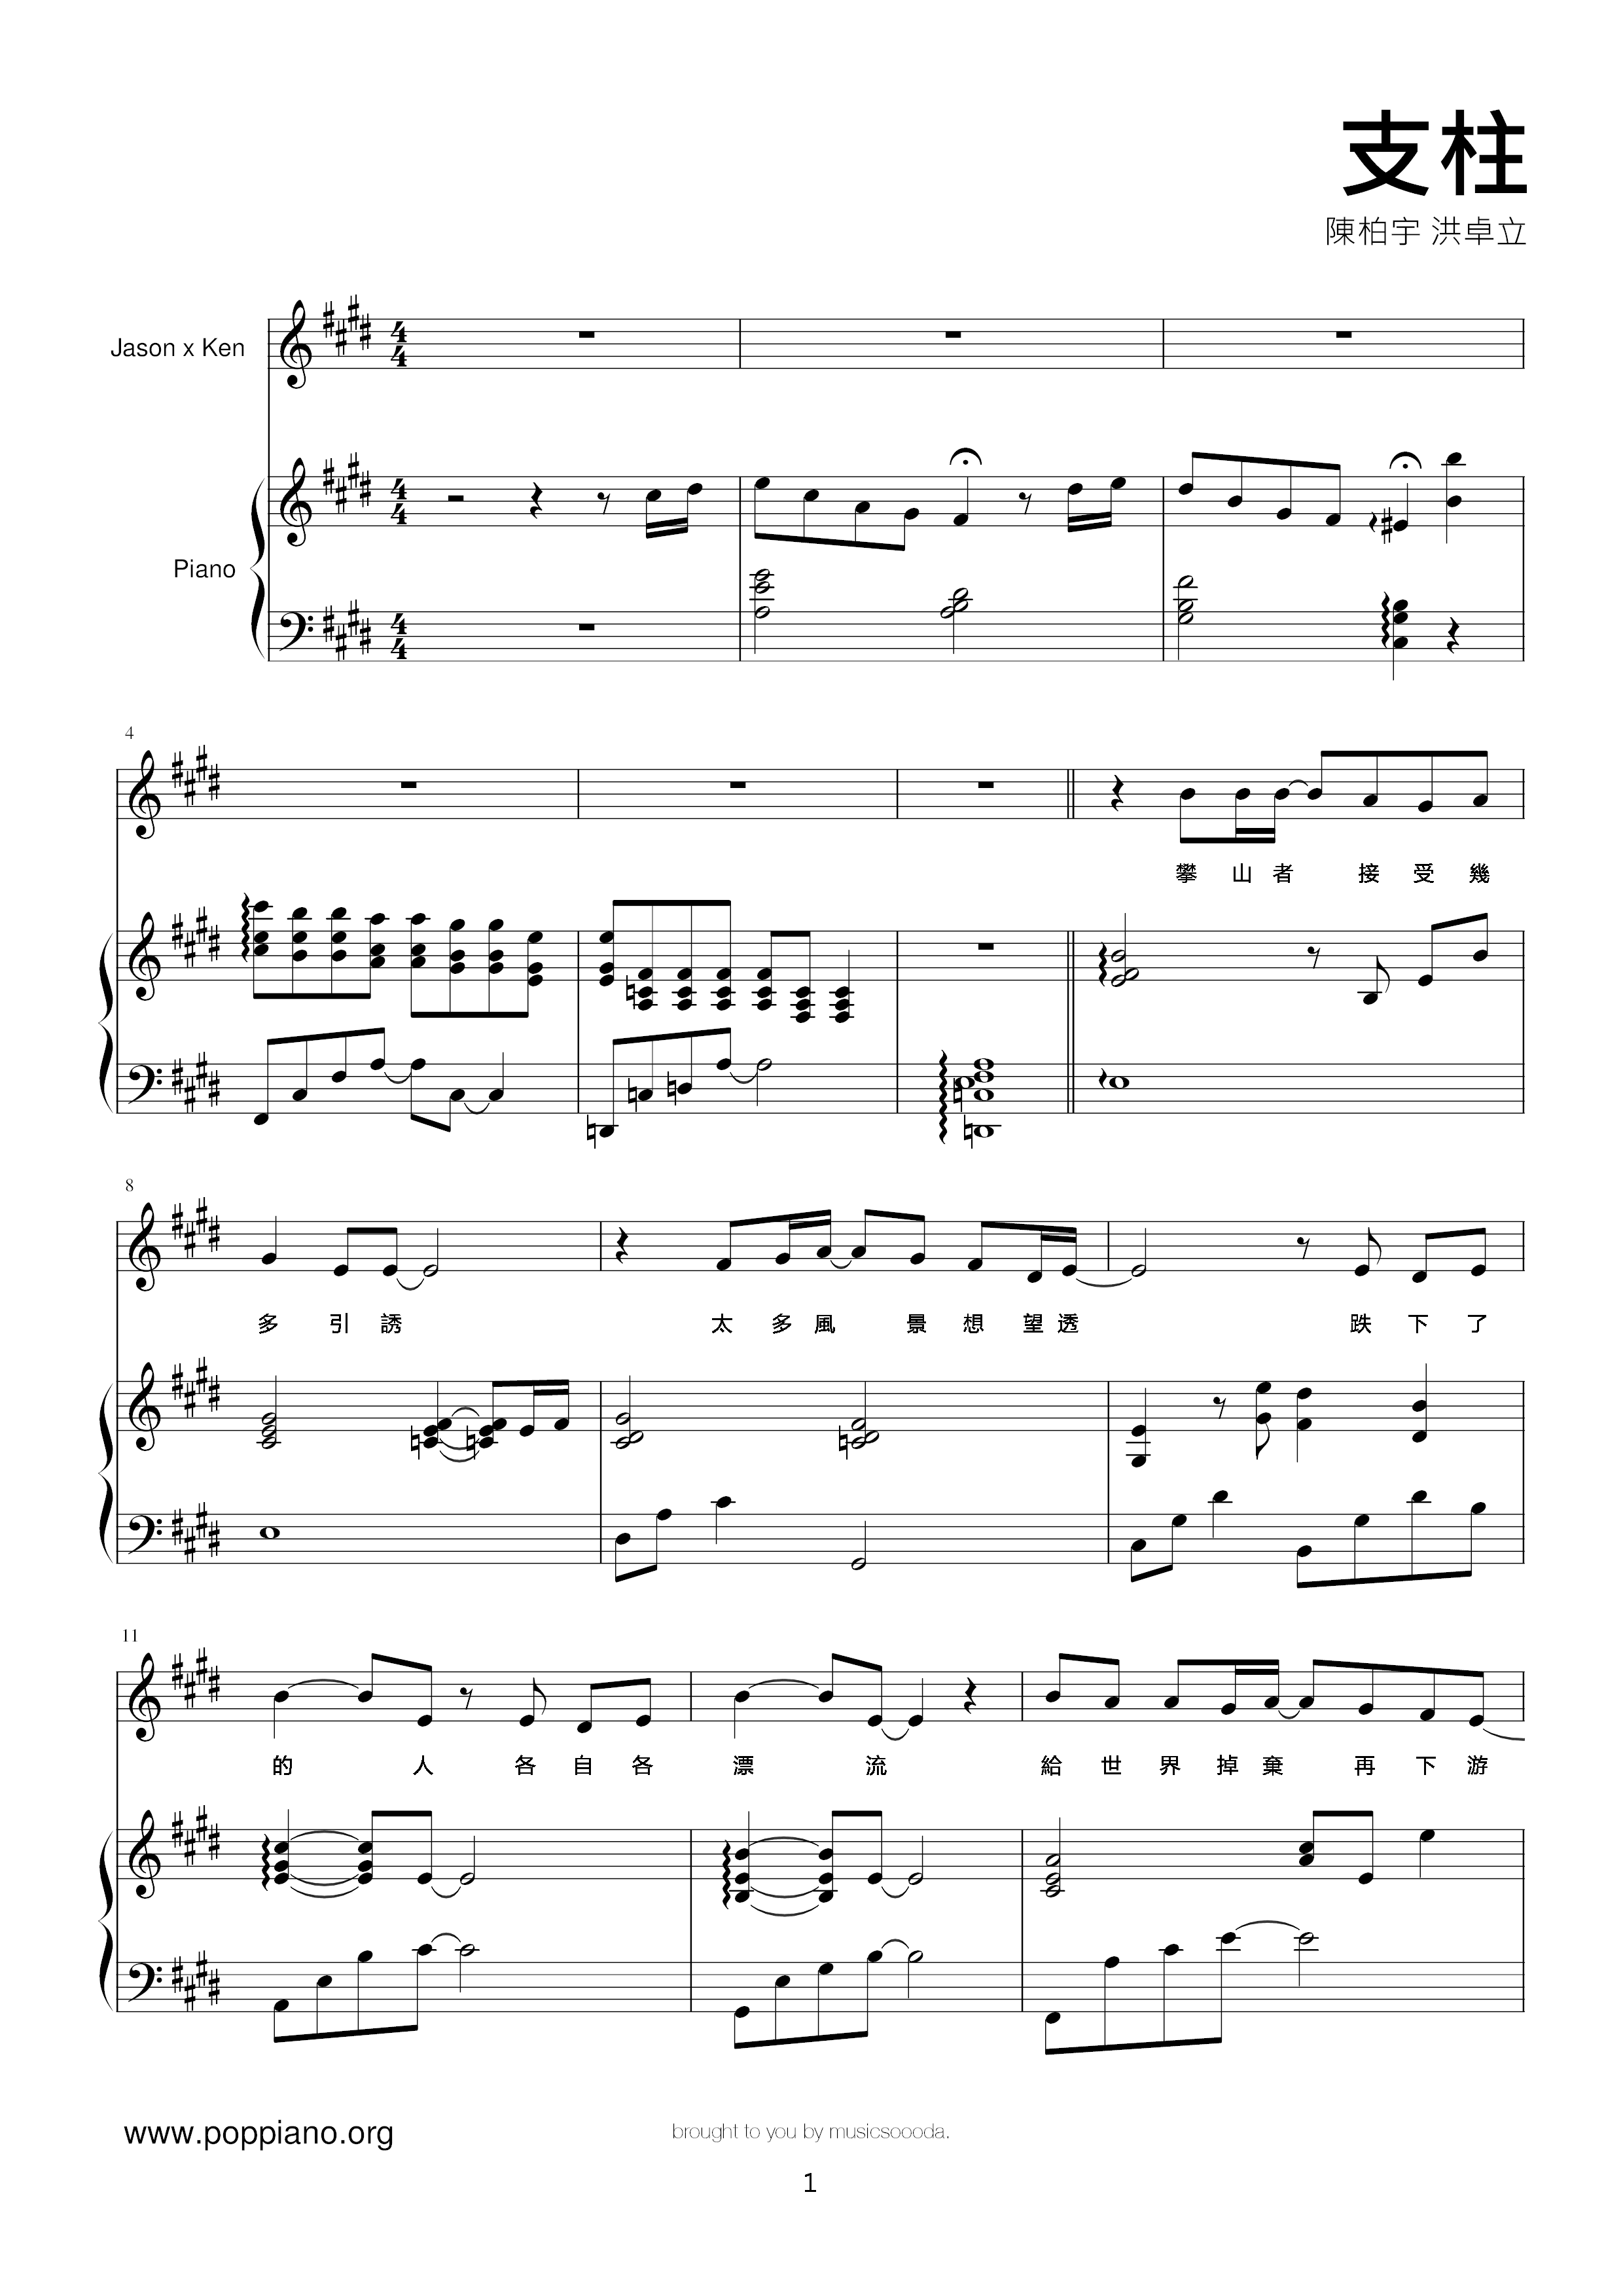 Pillar (The Theme Song Of The Micro-movie "Love Freedom") Score